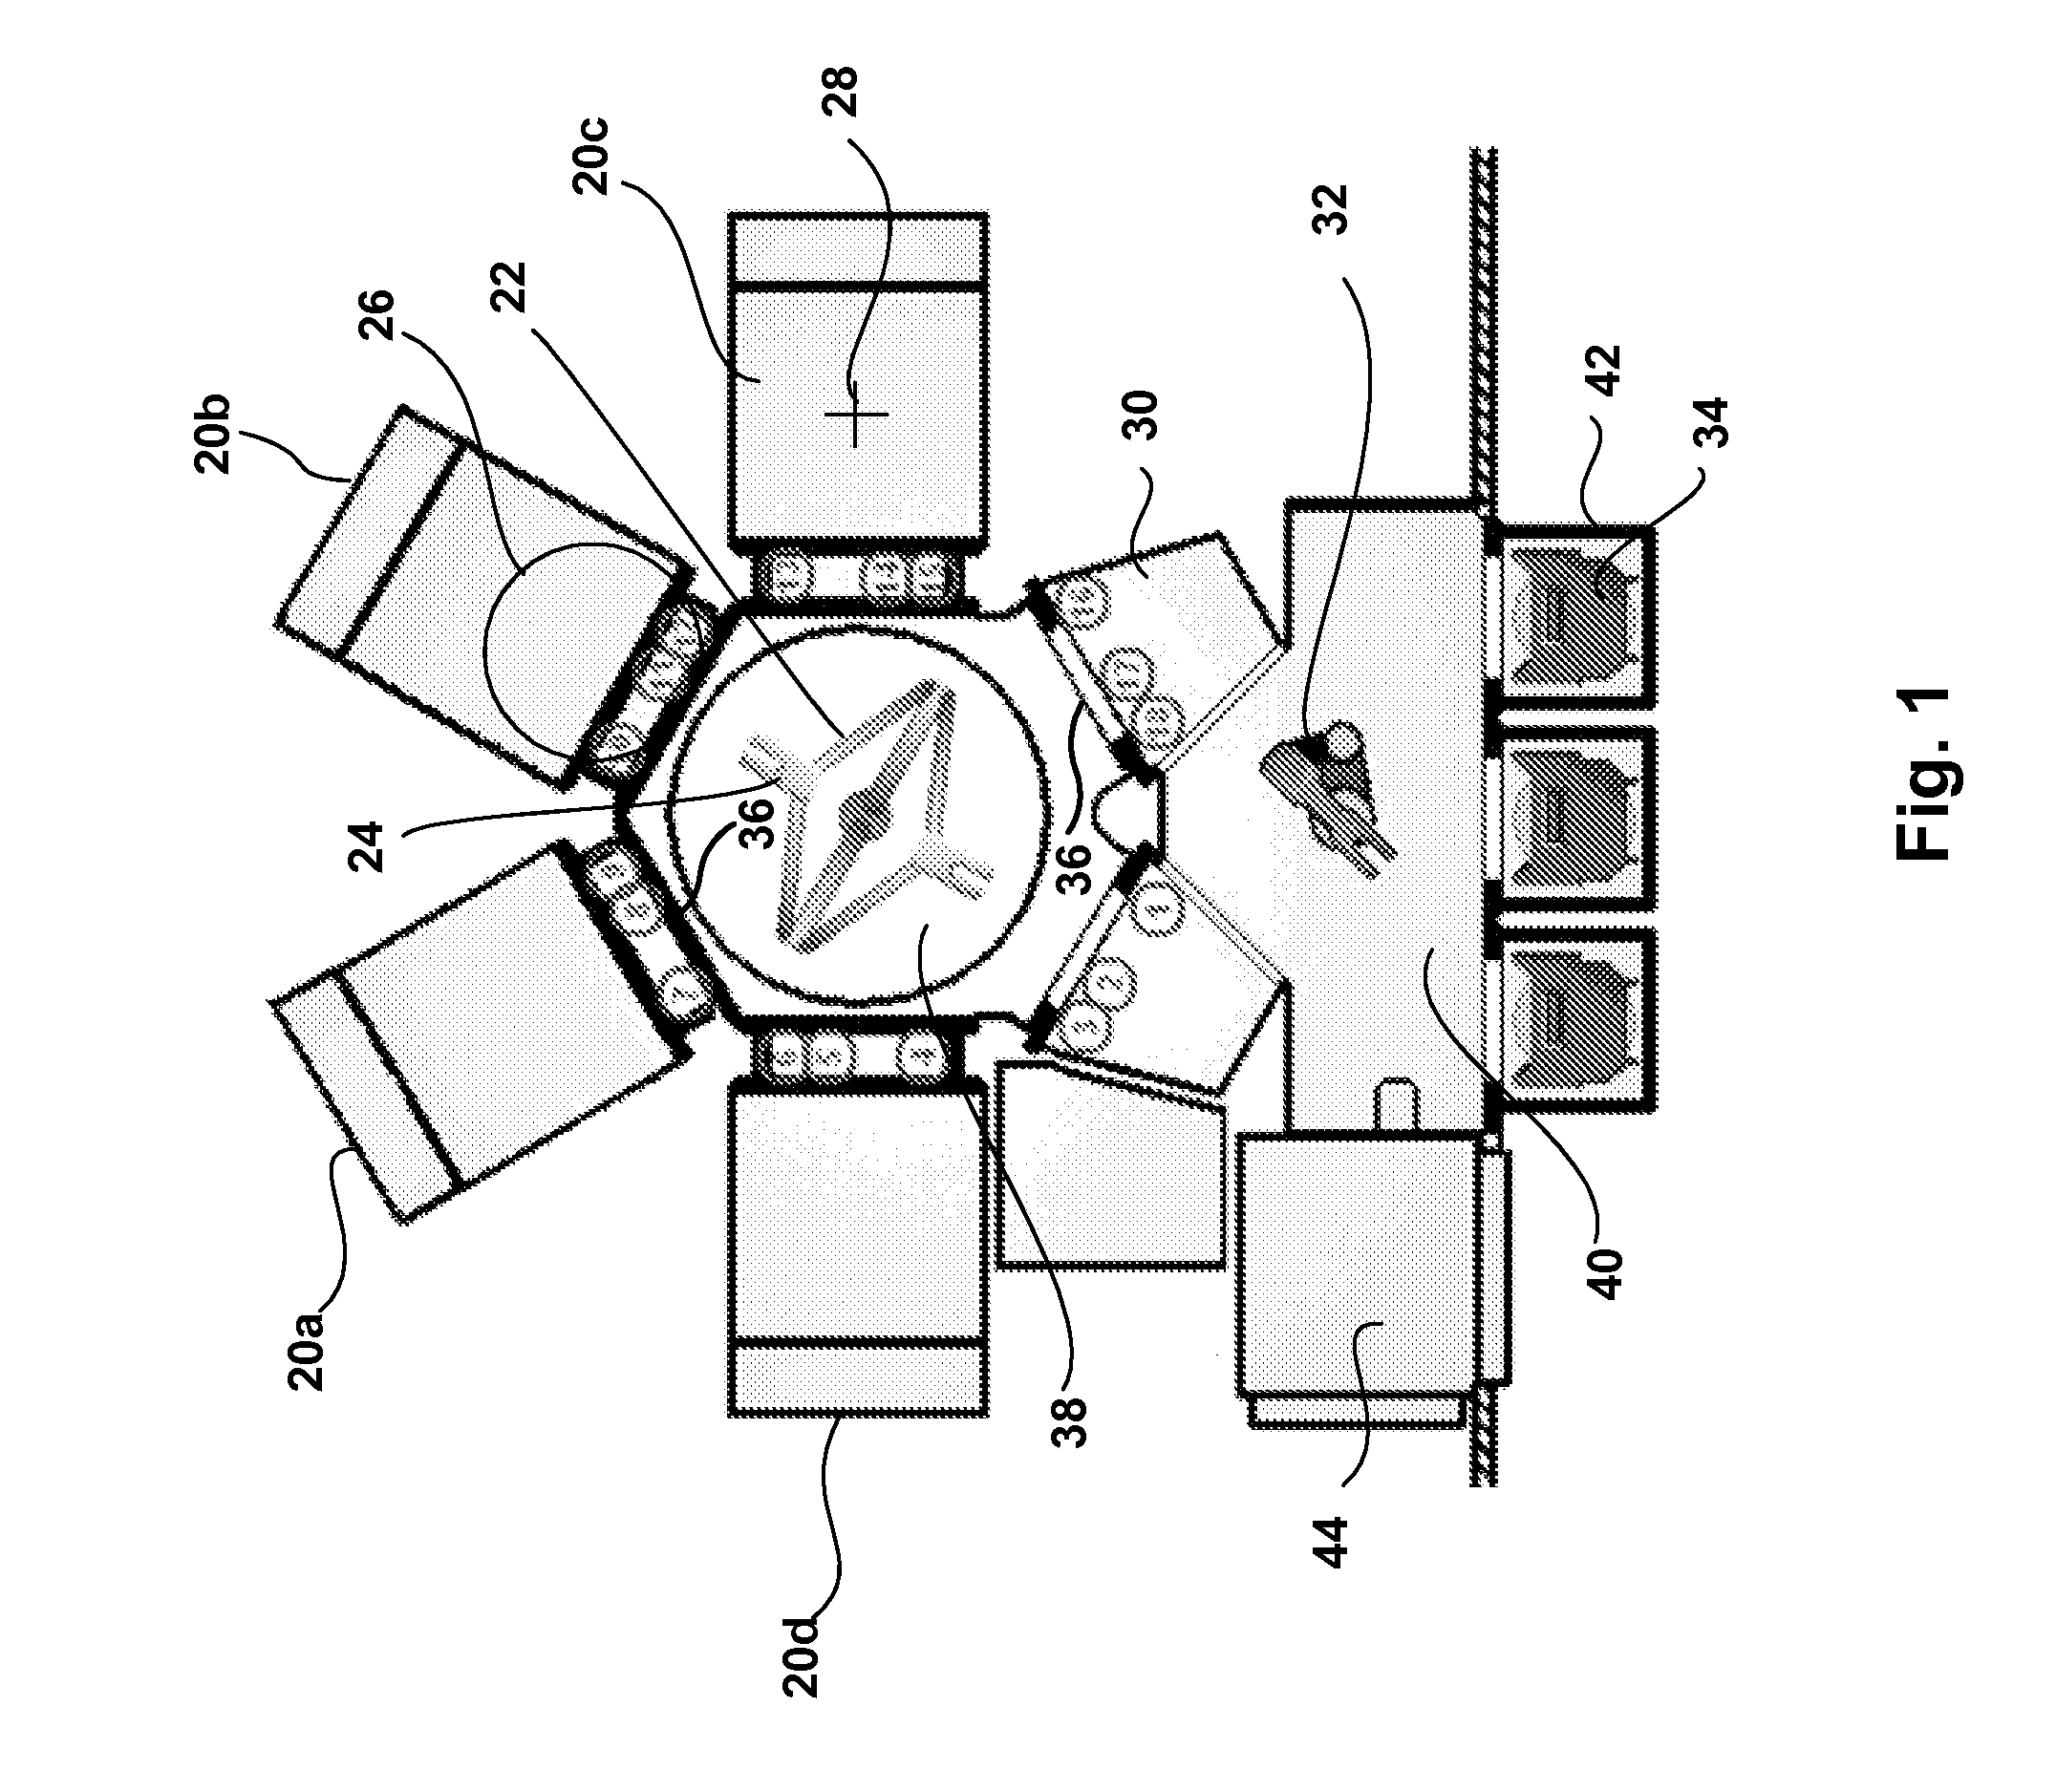 Dynamic alignment of wafers using compensation values obtained through a series of wafer movements